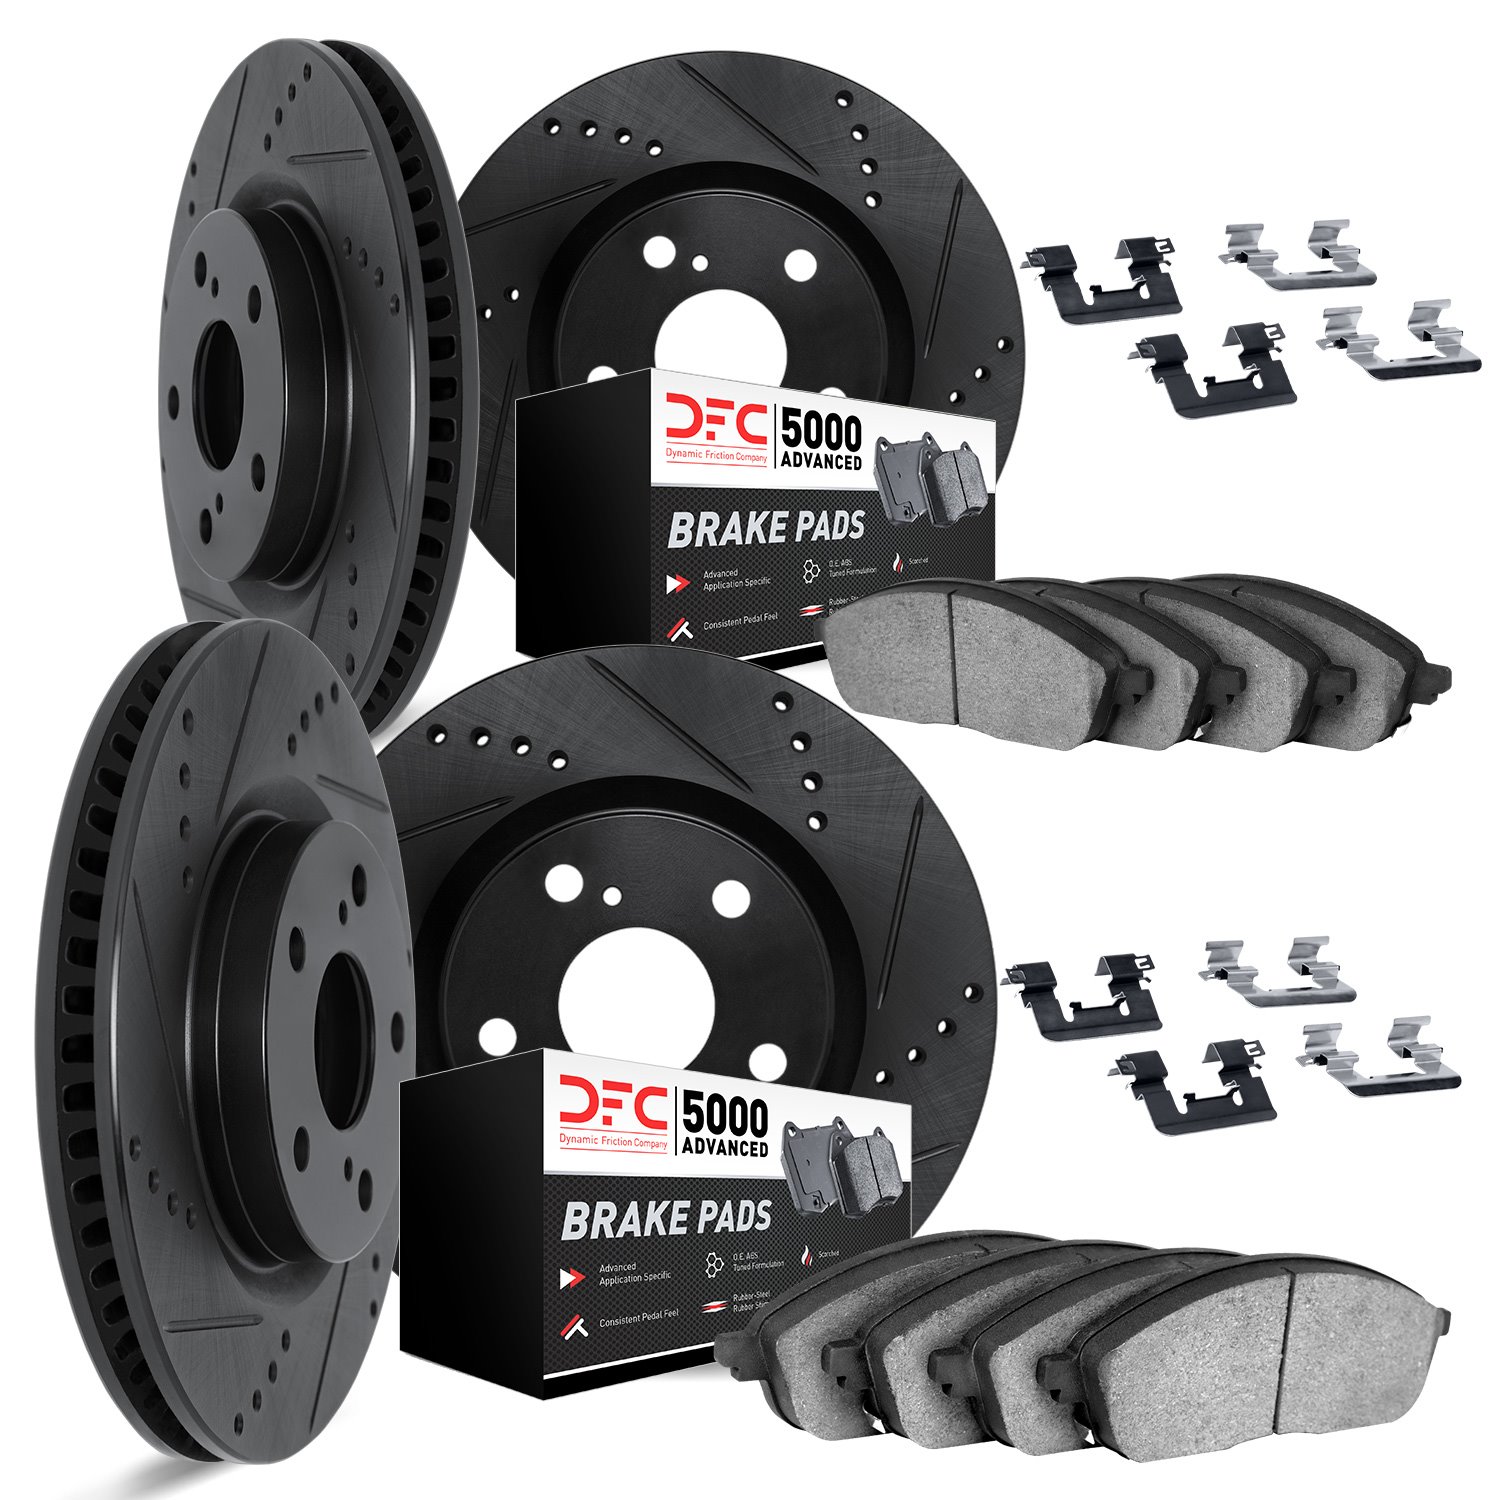 8514-31052 Drilled/Slotted Brake Rotors w/5000 Advanced Brake Pads Kit & Hardware [Black], 2007-2015 BMW, Position: Front and Re